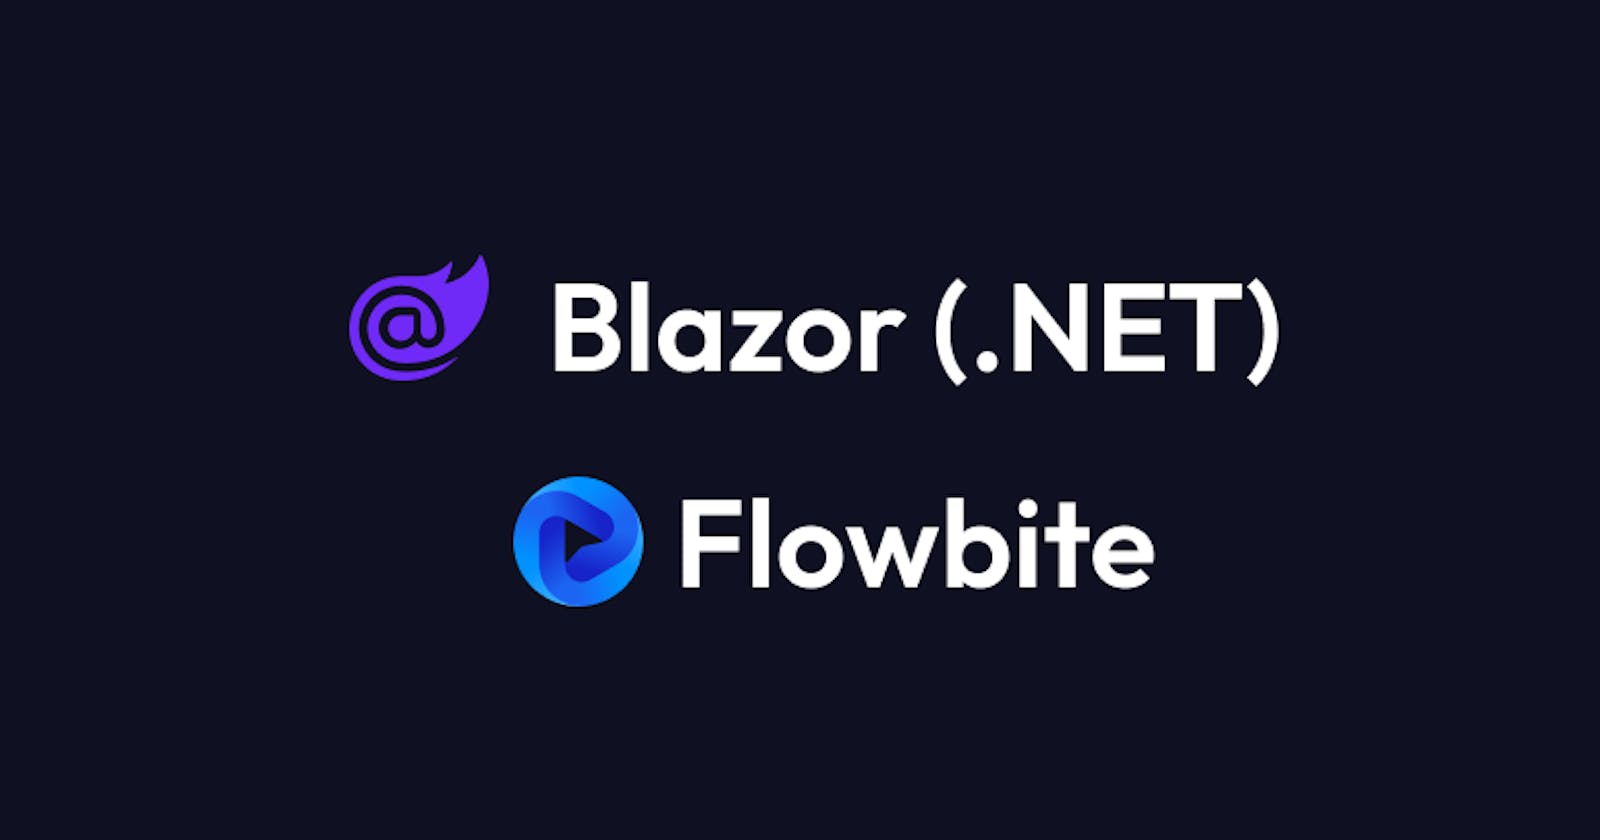 How to create a new Blazor (.NET) project and configure it with Flowbite and Tailwind CSS